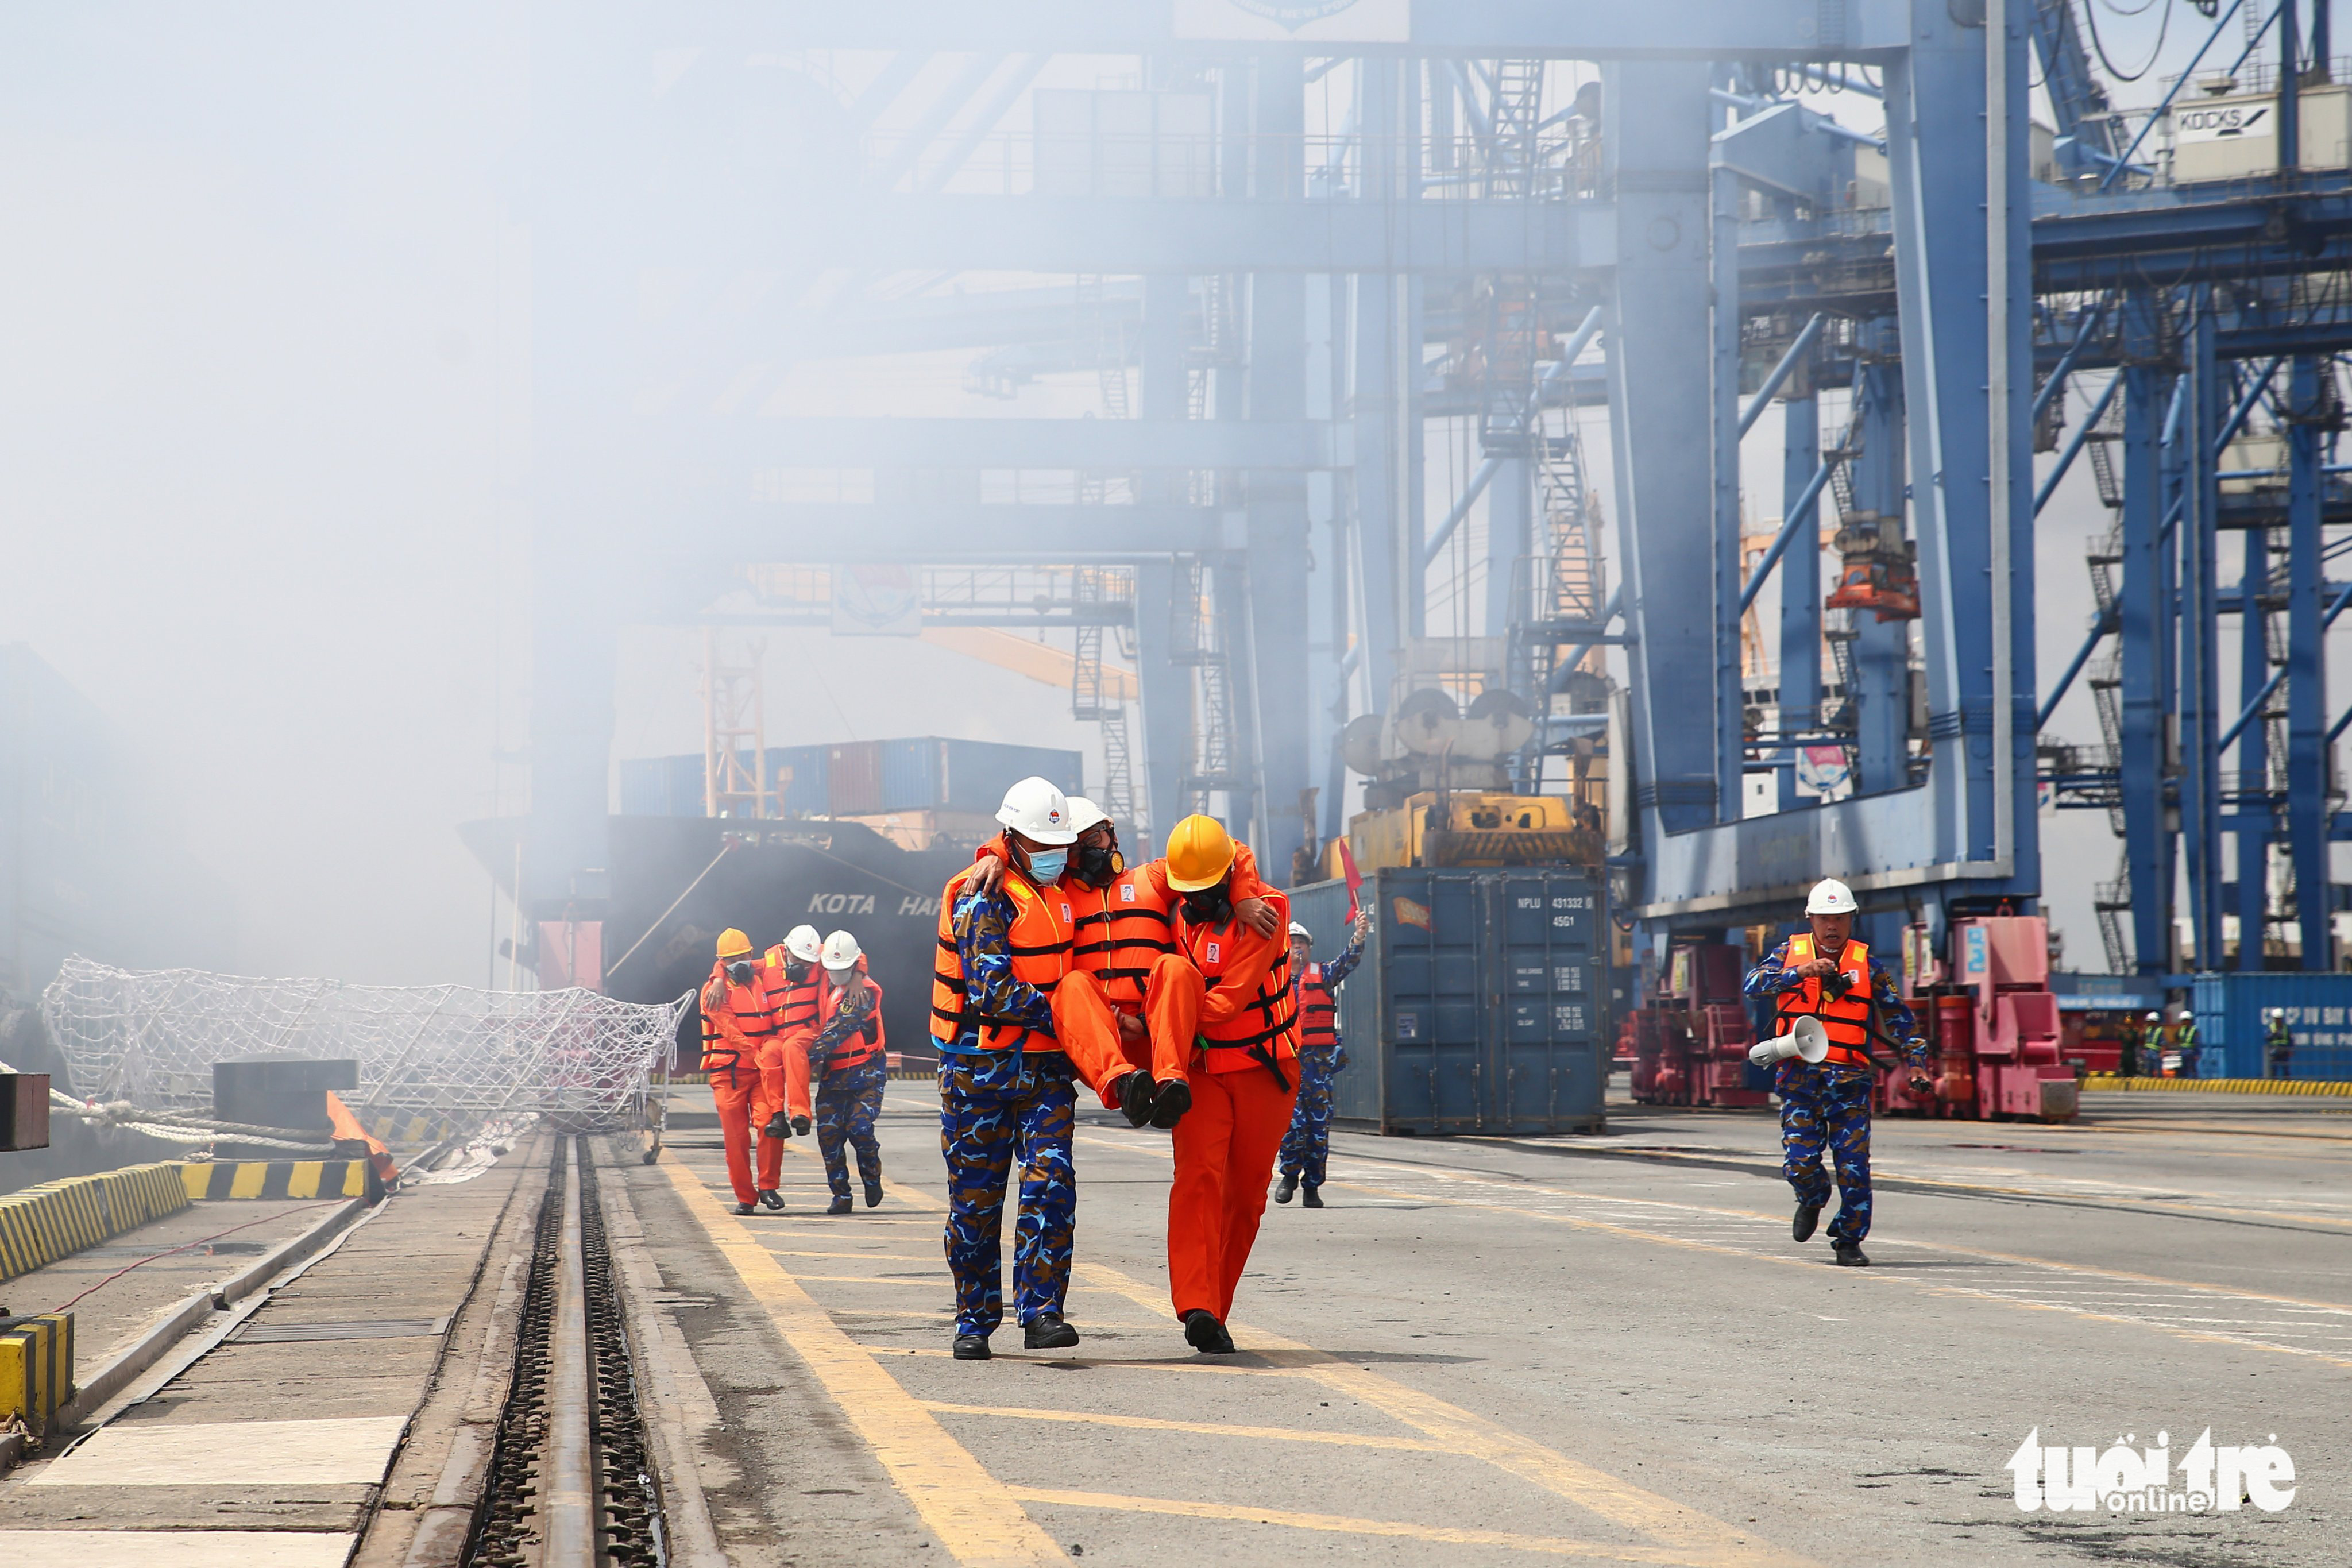 Crew members are rescued from the fire on a cargo ship during the drill at Cat Lai Port in Ho Chi Minh City, September 24, 2022. Photo: Le An / Tuoi Tre